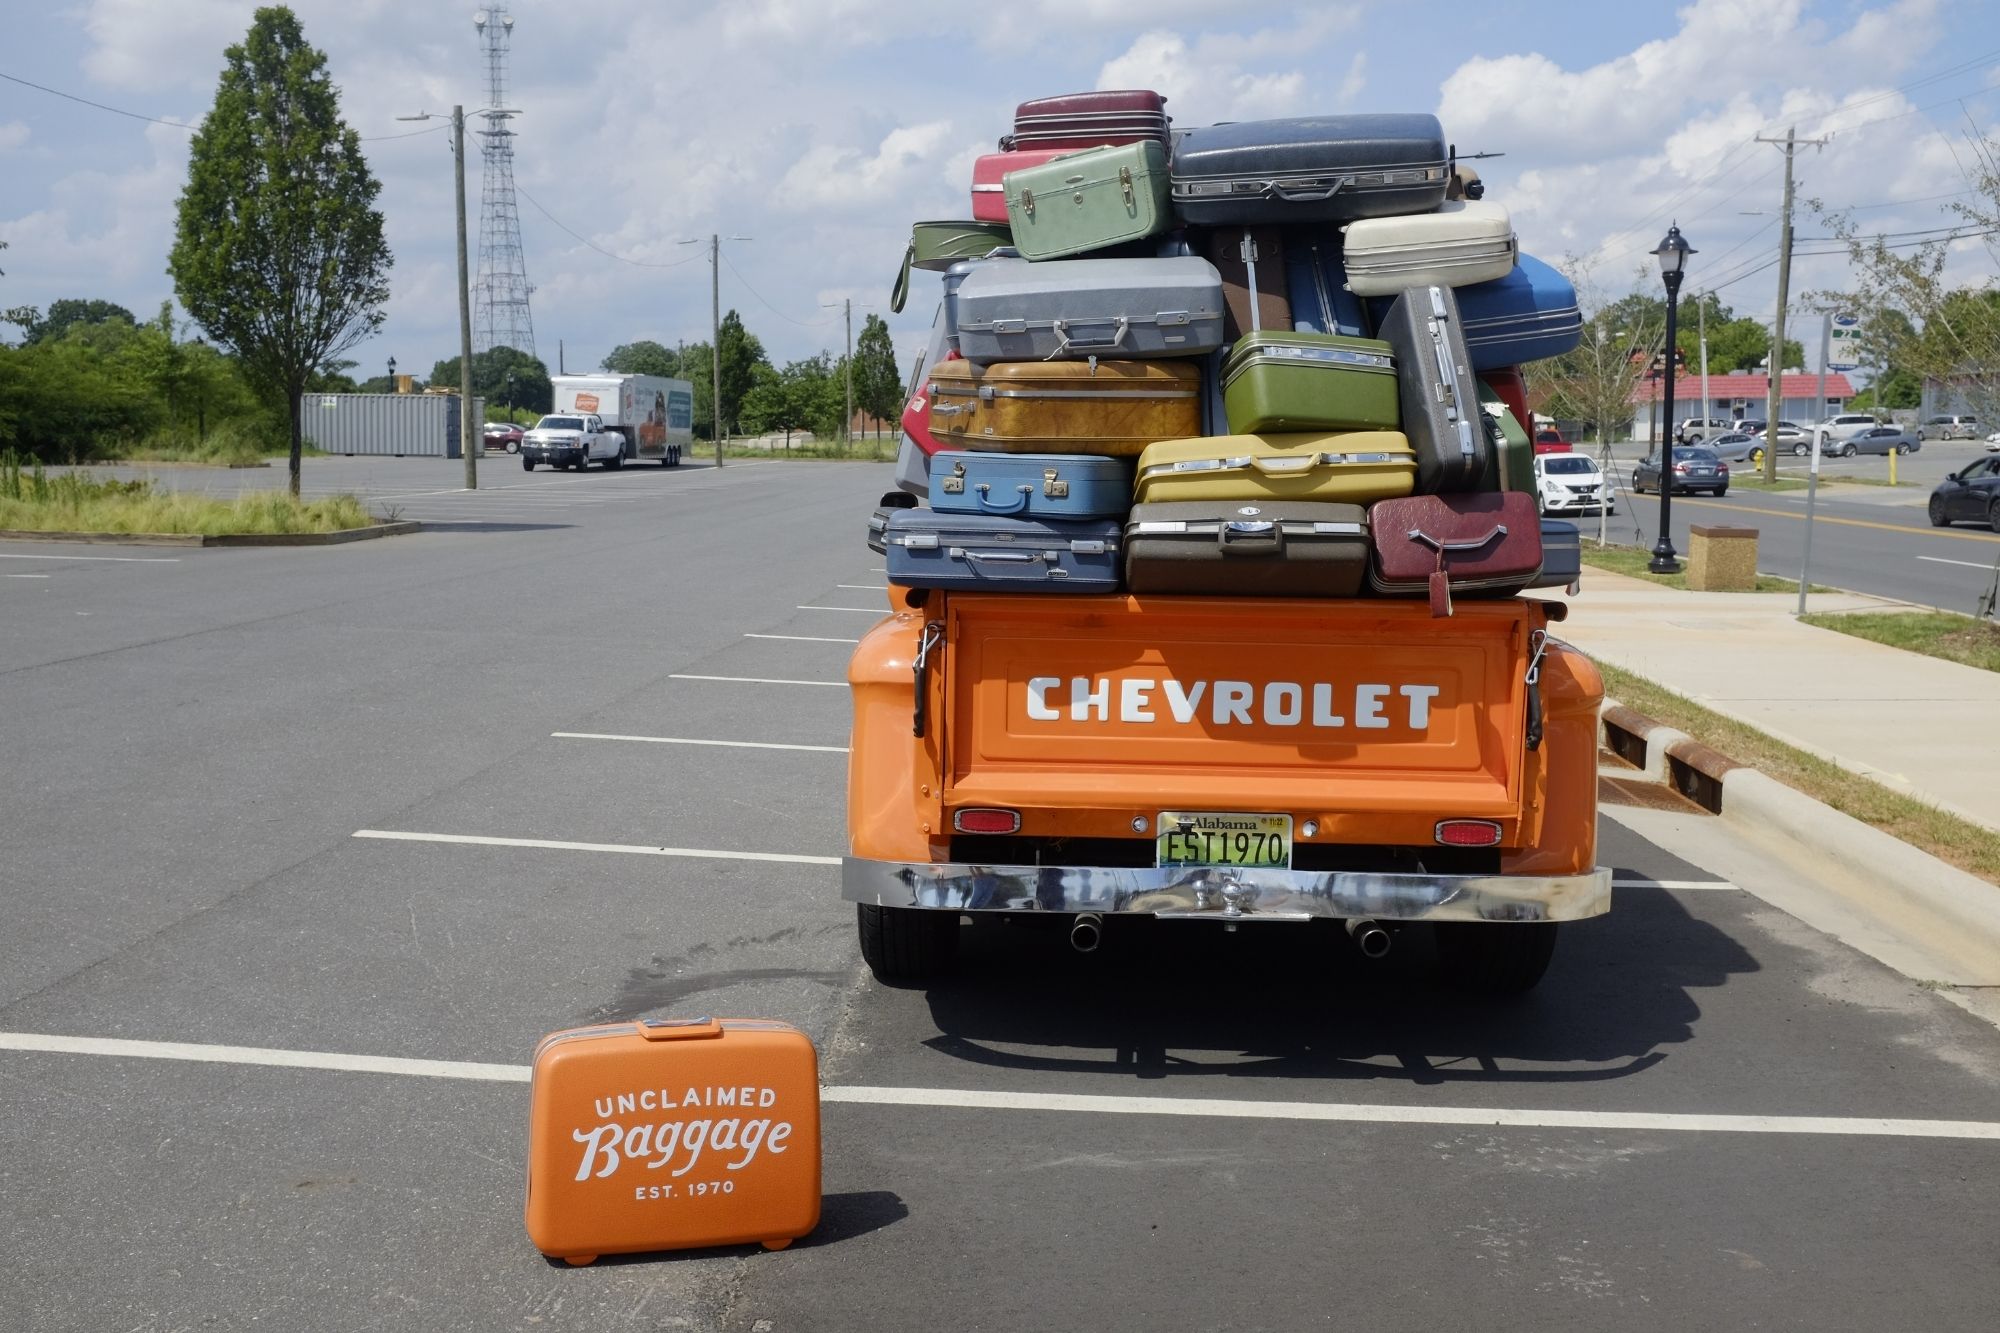 An orange vintage Chevy with a large mountain of suitcases in the bed